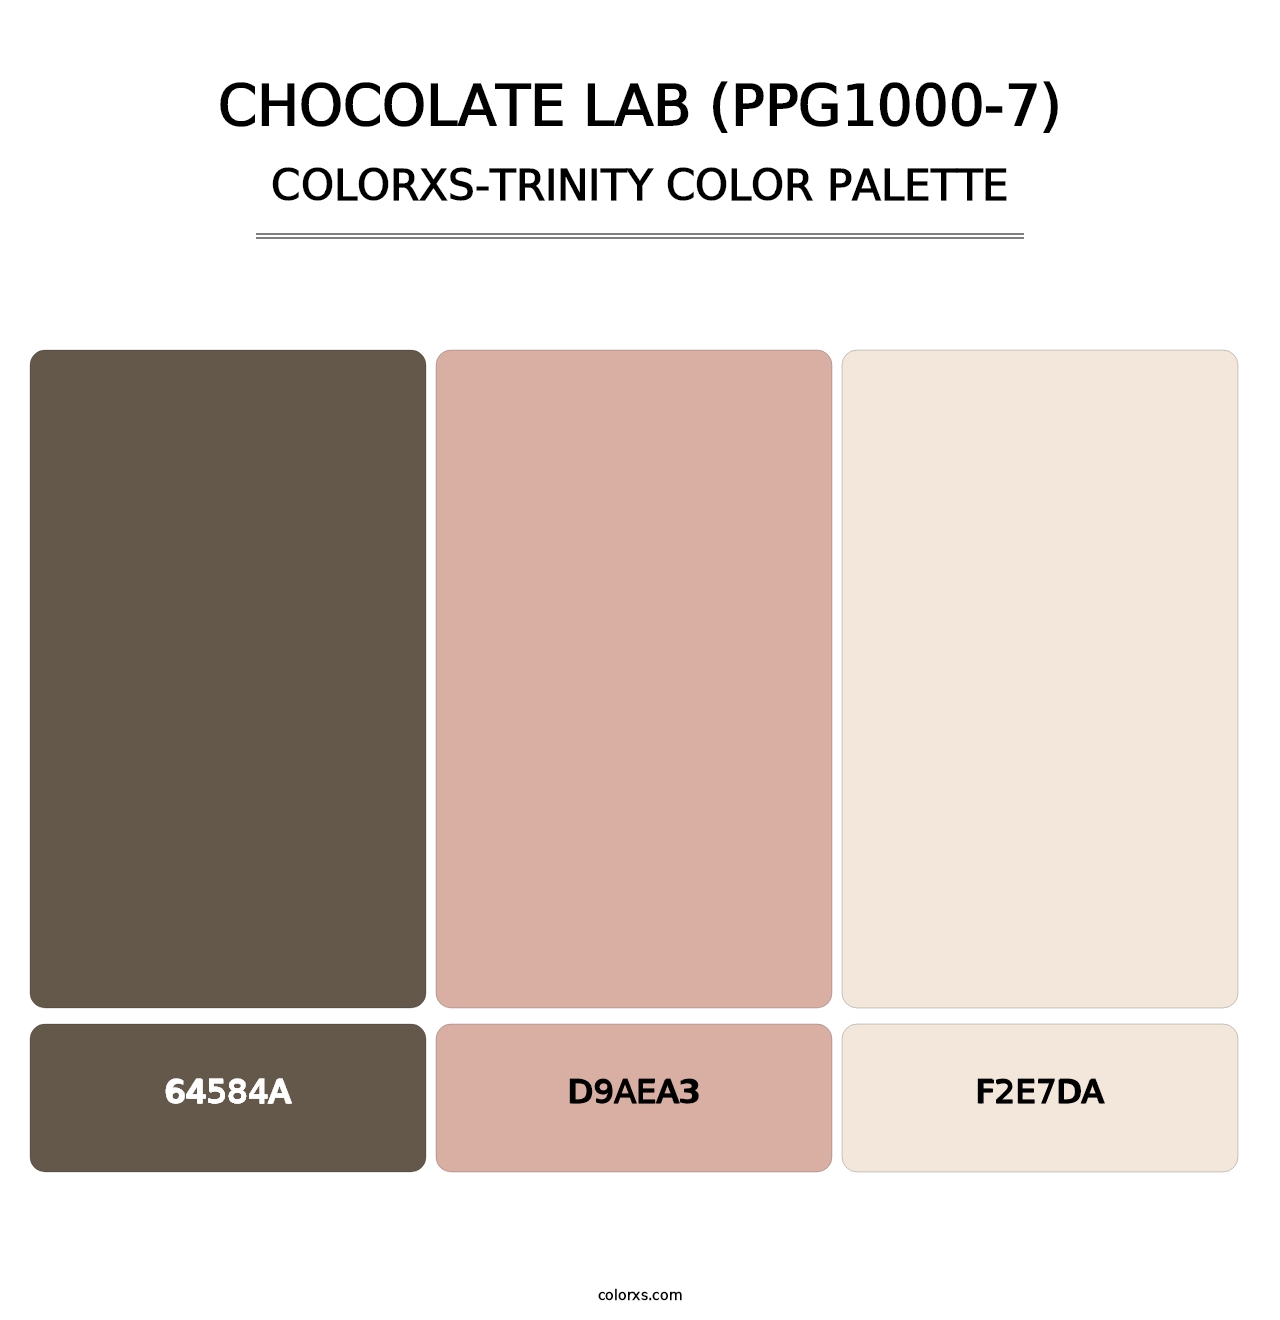 Chocolate Lab (PPG1000-7) - Colorxs Trinity Palette